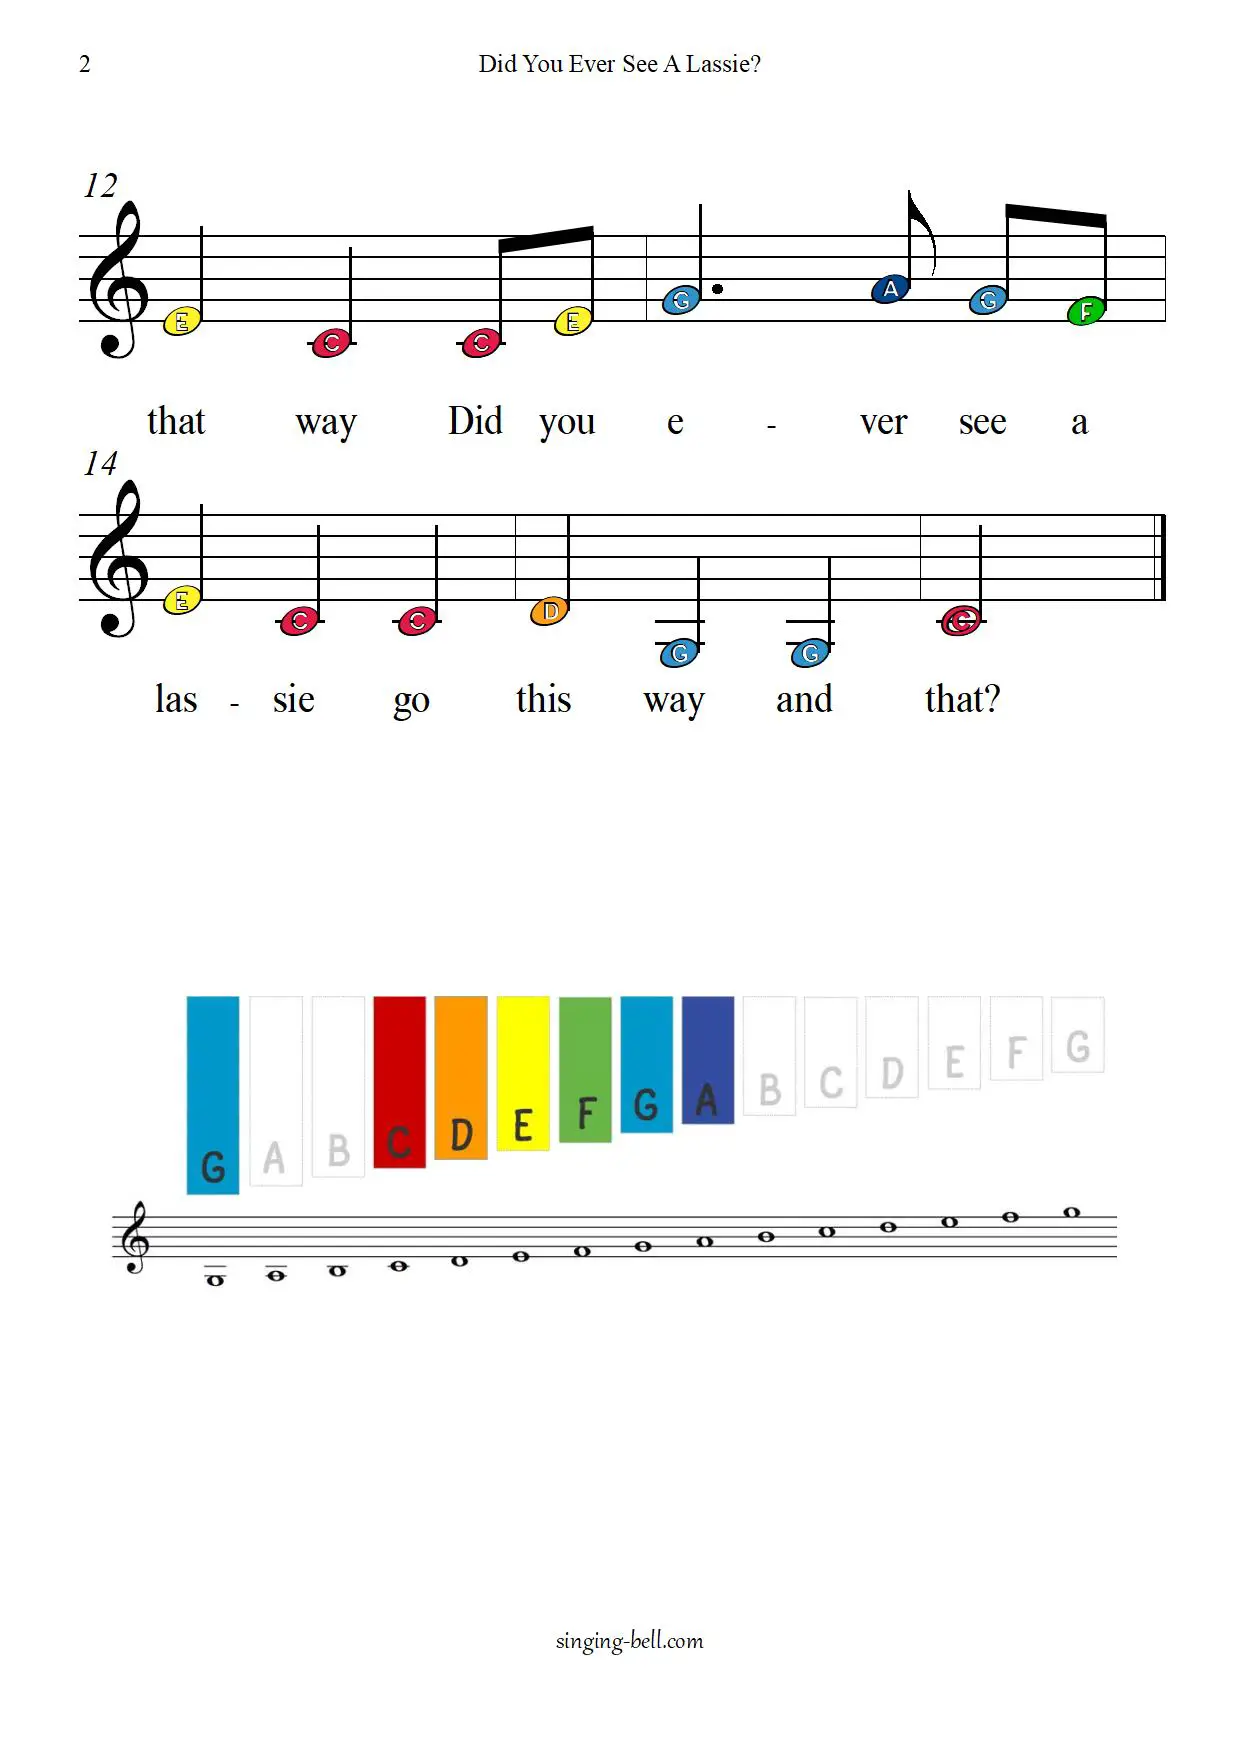 Did you ever see a lassie free xylophone glockenspiel sheet music color notes chart pdf page-2